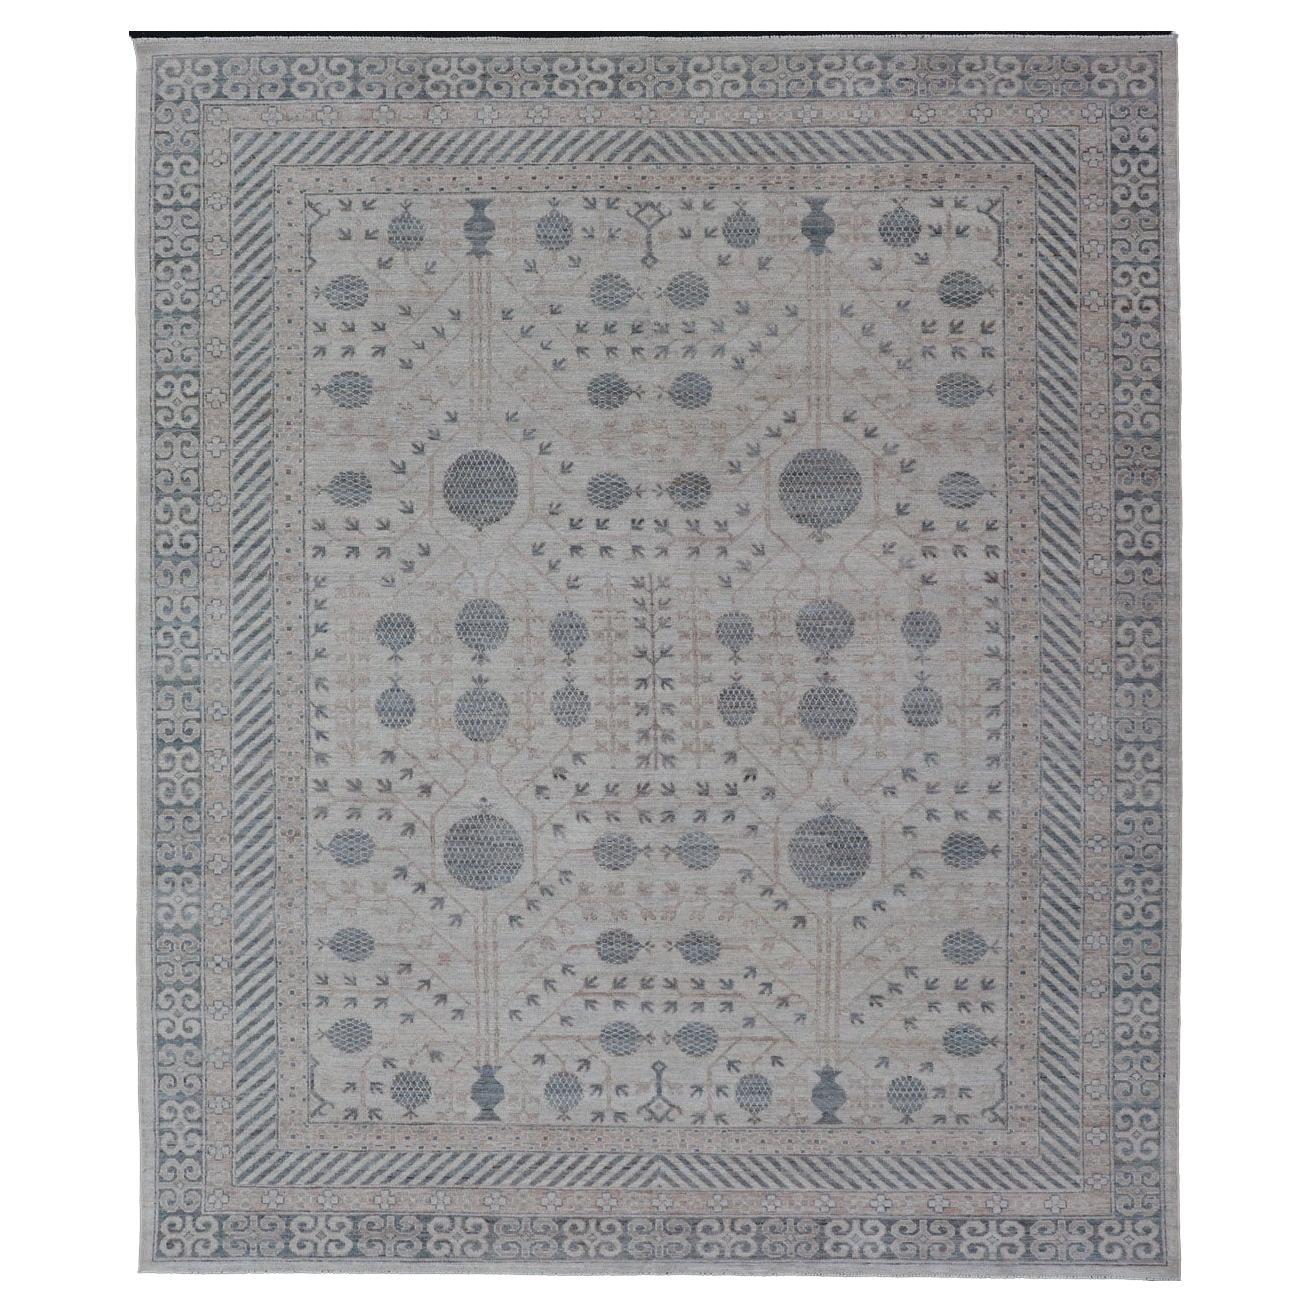 Modern Tribal Khotan Rug in Shades of Cream, Tan, and Light Teal For Sale